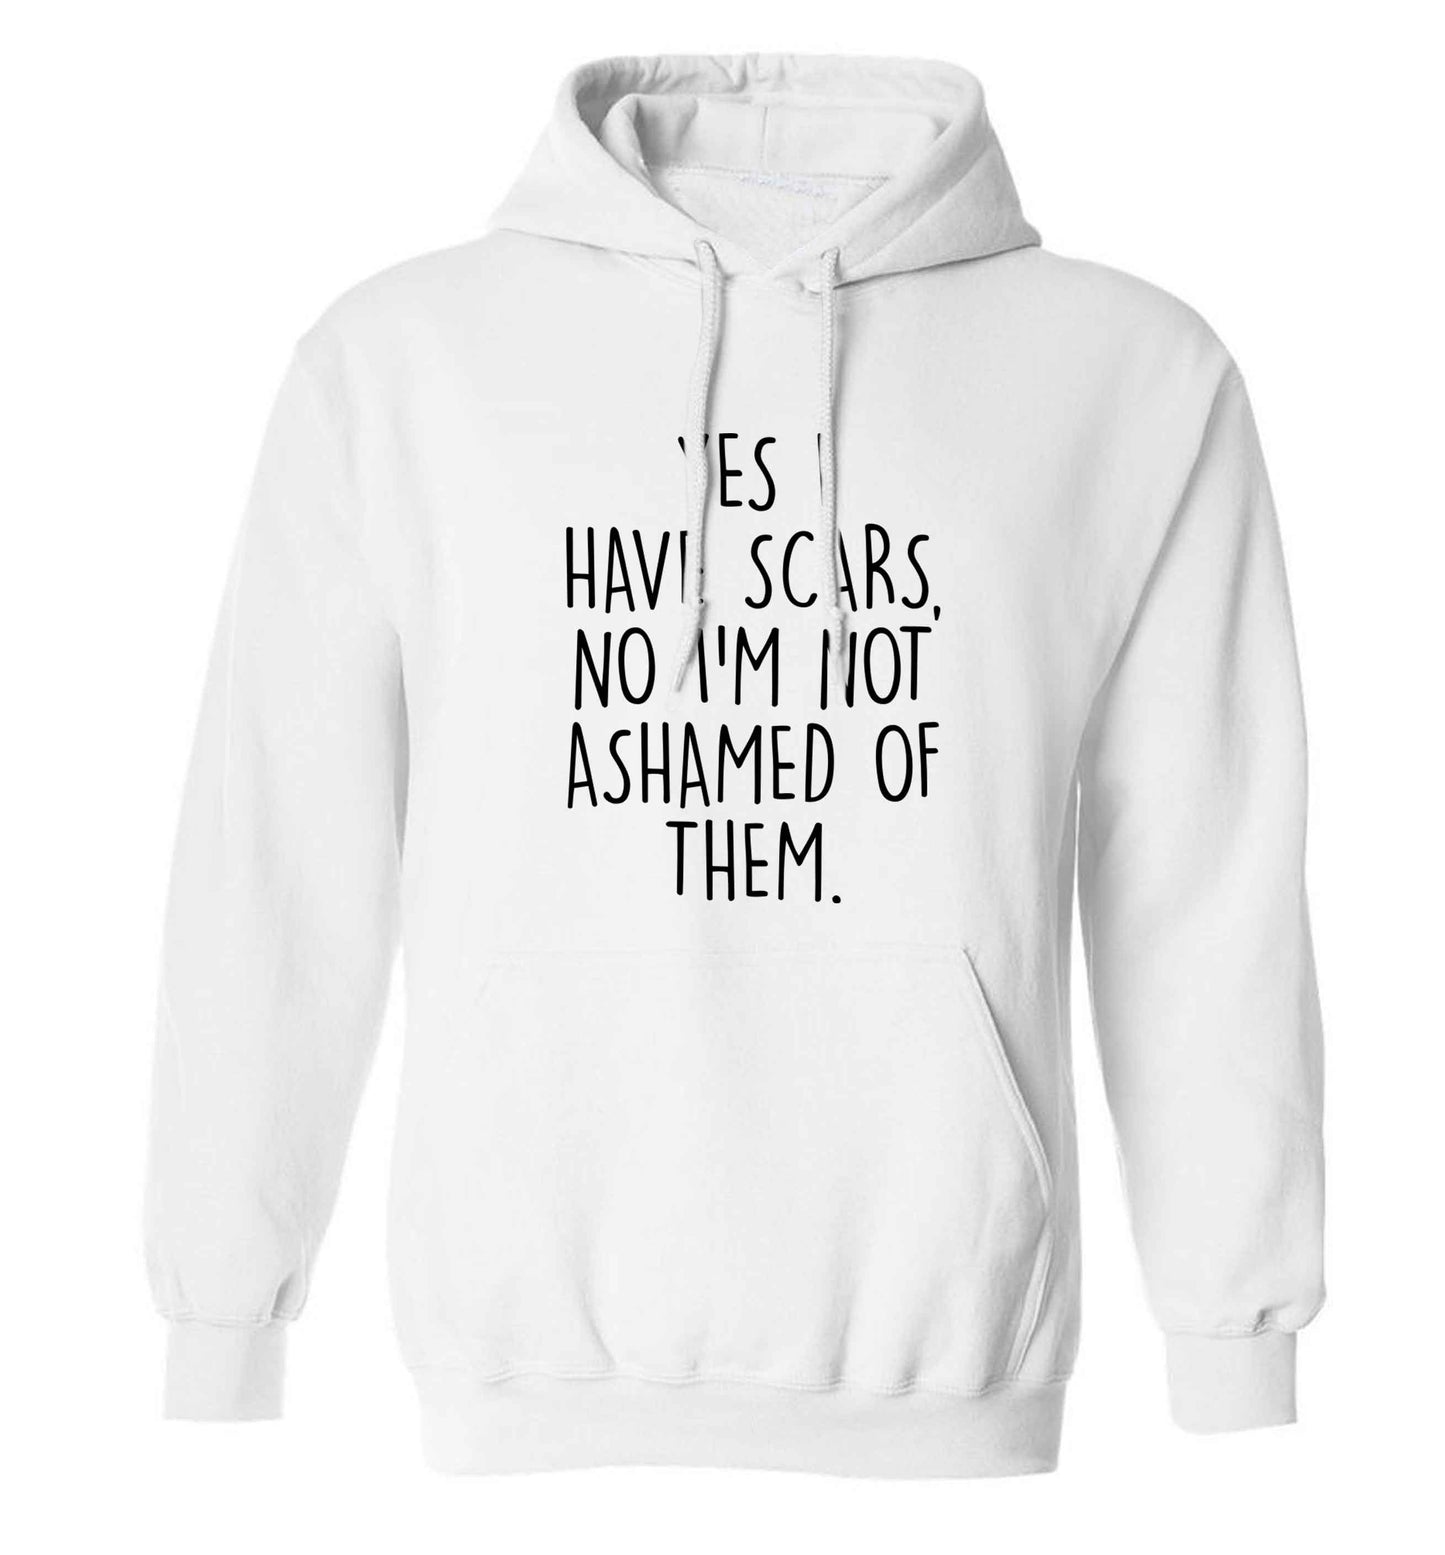 Yes I have scars, no I'm not ashamed of them adults unisex white hoodie 2XL